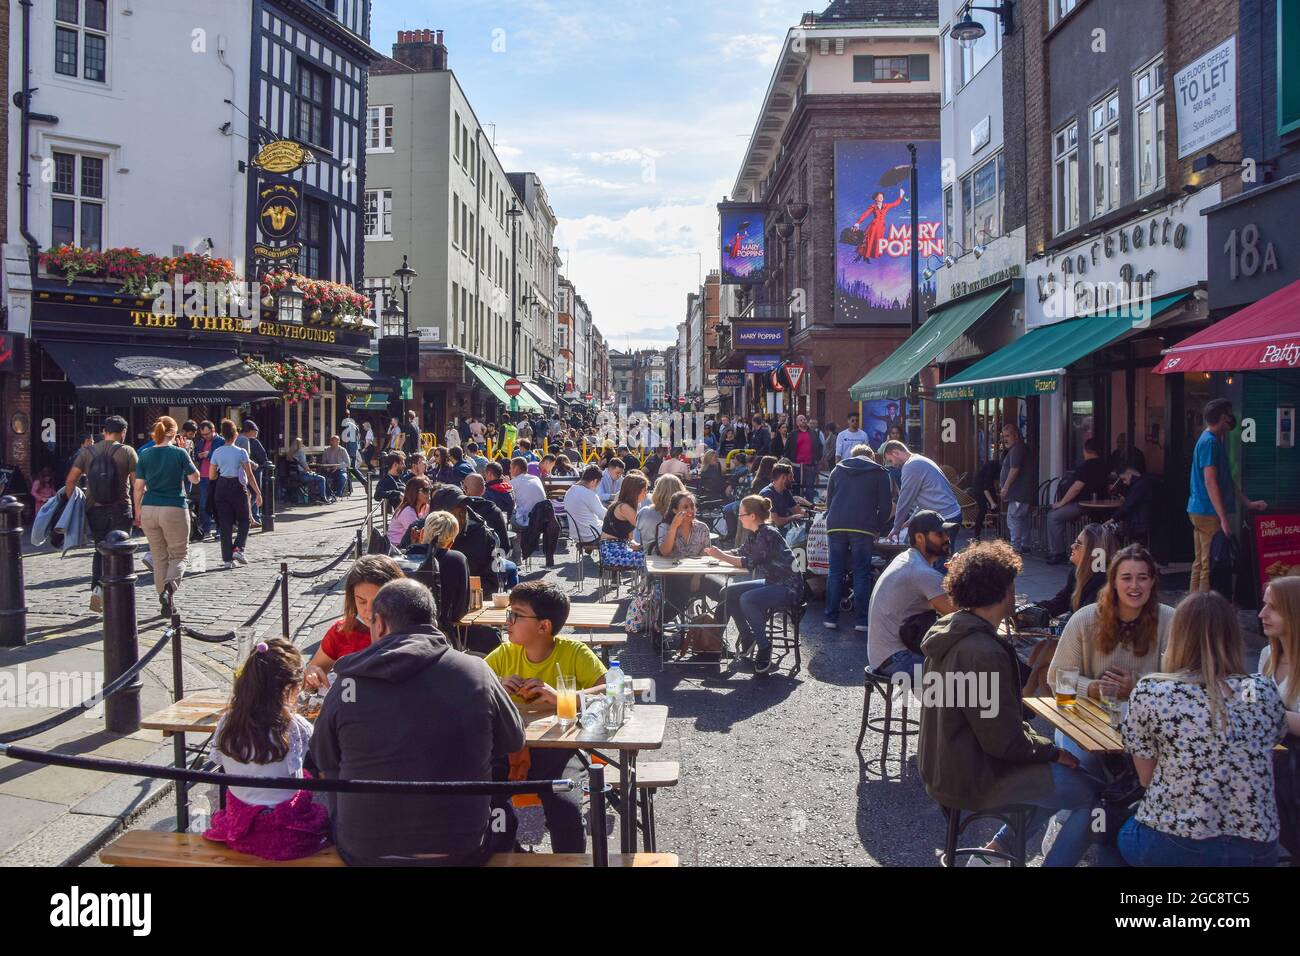 London, United Kingdom. 7th August 2021. Busy Old Compton Street. People flocked to bars and restaurants in Soho to enjoy the sunshine after a morning of heavy rain showers . (Credit: Vuk Valcic / Alamy Live News) Stock Photo